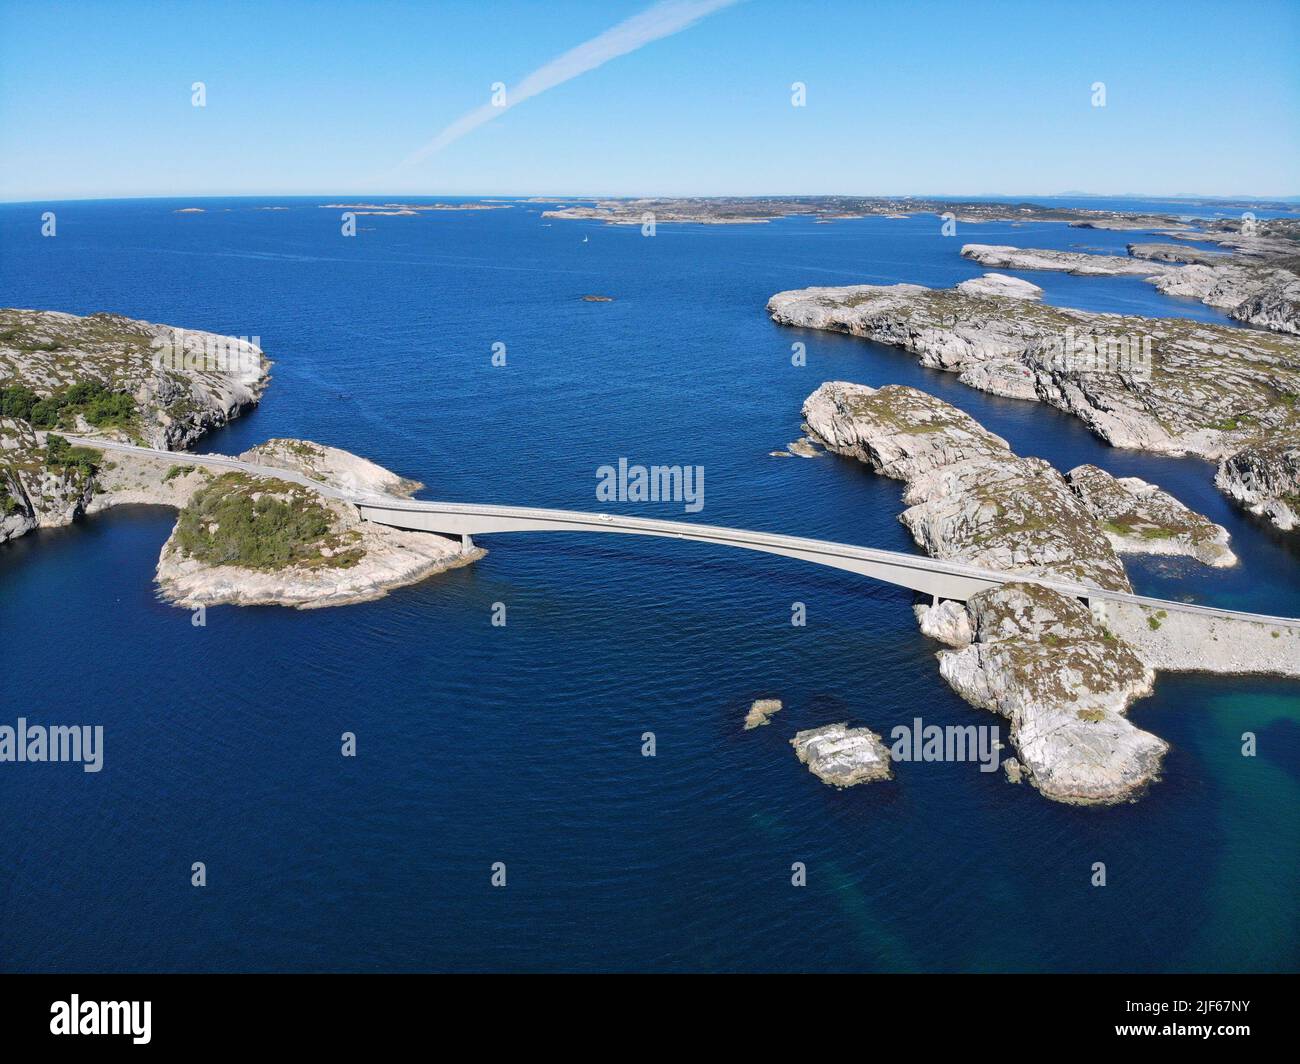 Norway islands drone view. Vestland county island scenic coast road on Toftoy island (also known as Toftoyna) in Oygarden municipality. Stock Photo